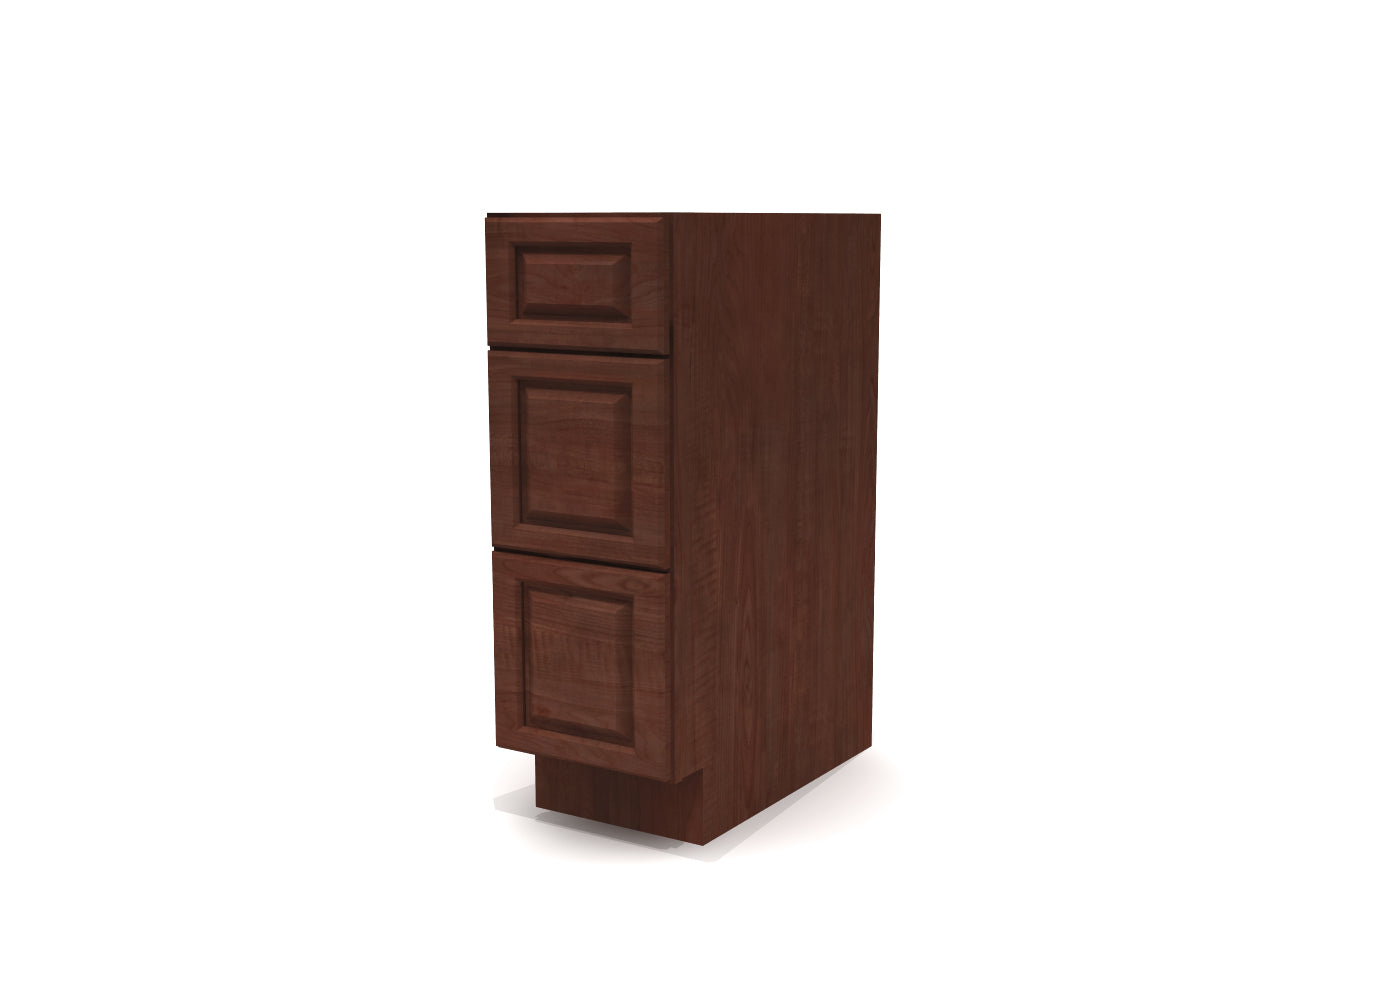 Drawer Base 12" Wide Cherry Raised Panel Cabinet